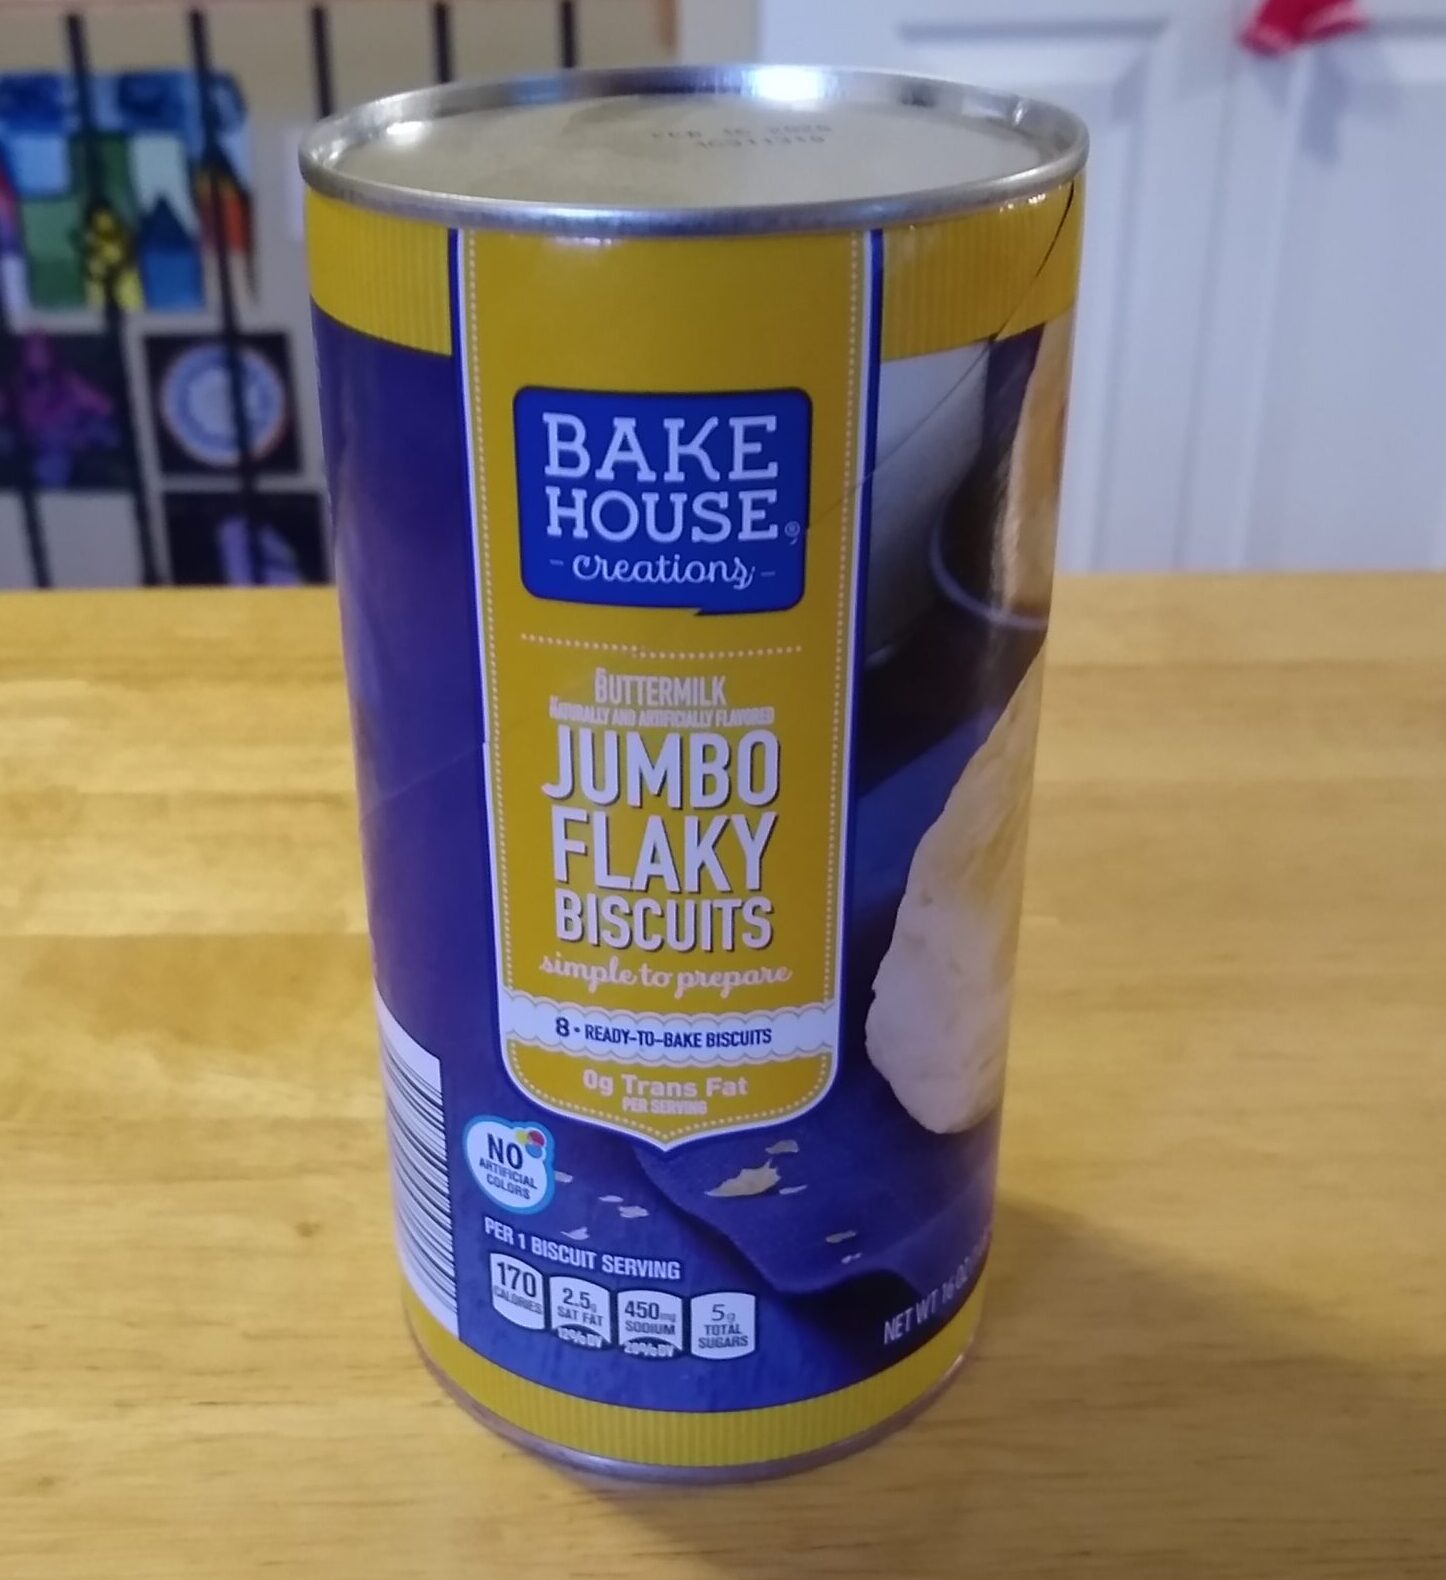 Bake House Buttermilk Jumbo Flaky Biscuits